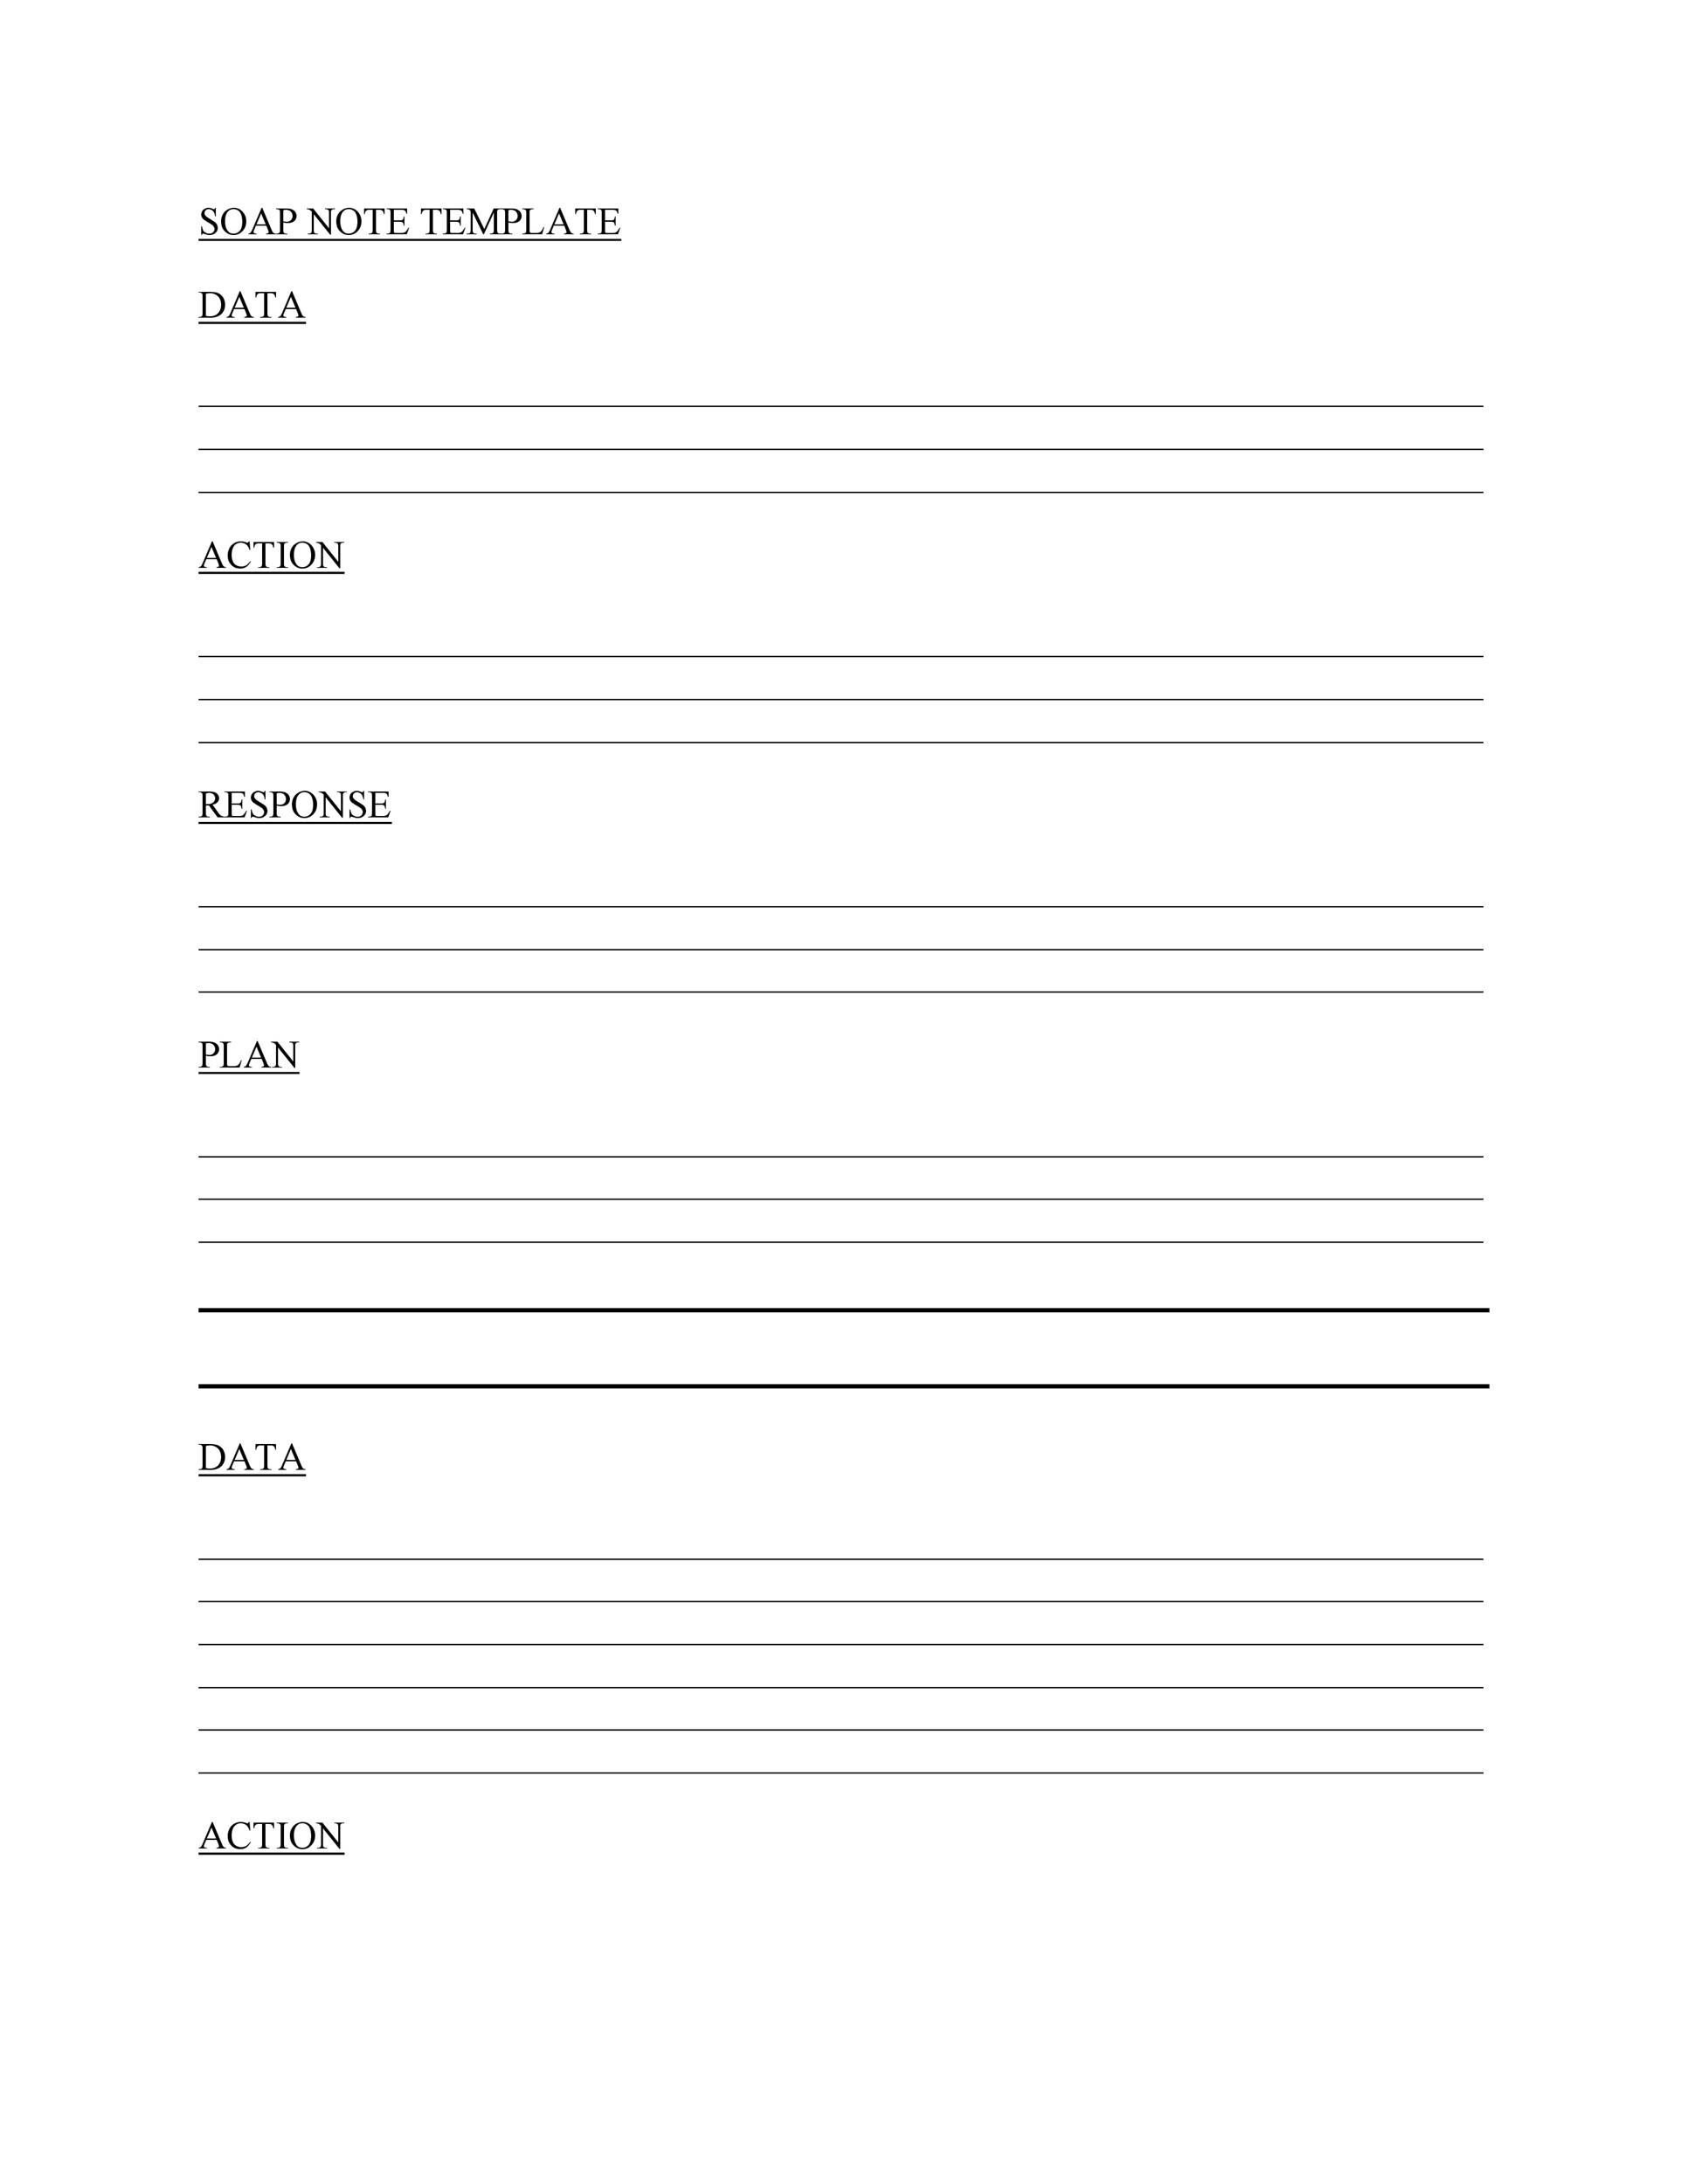 Free Soap Note Template 08